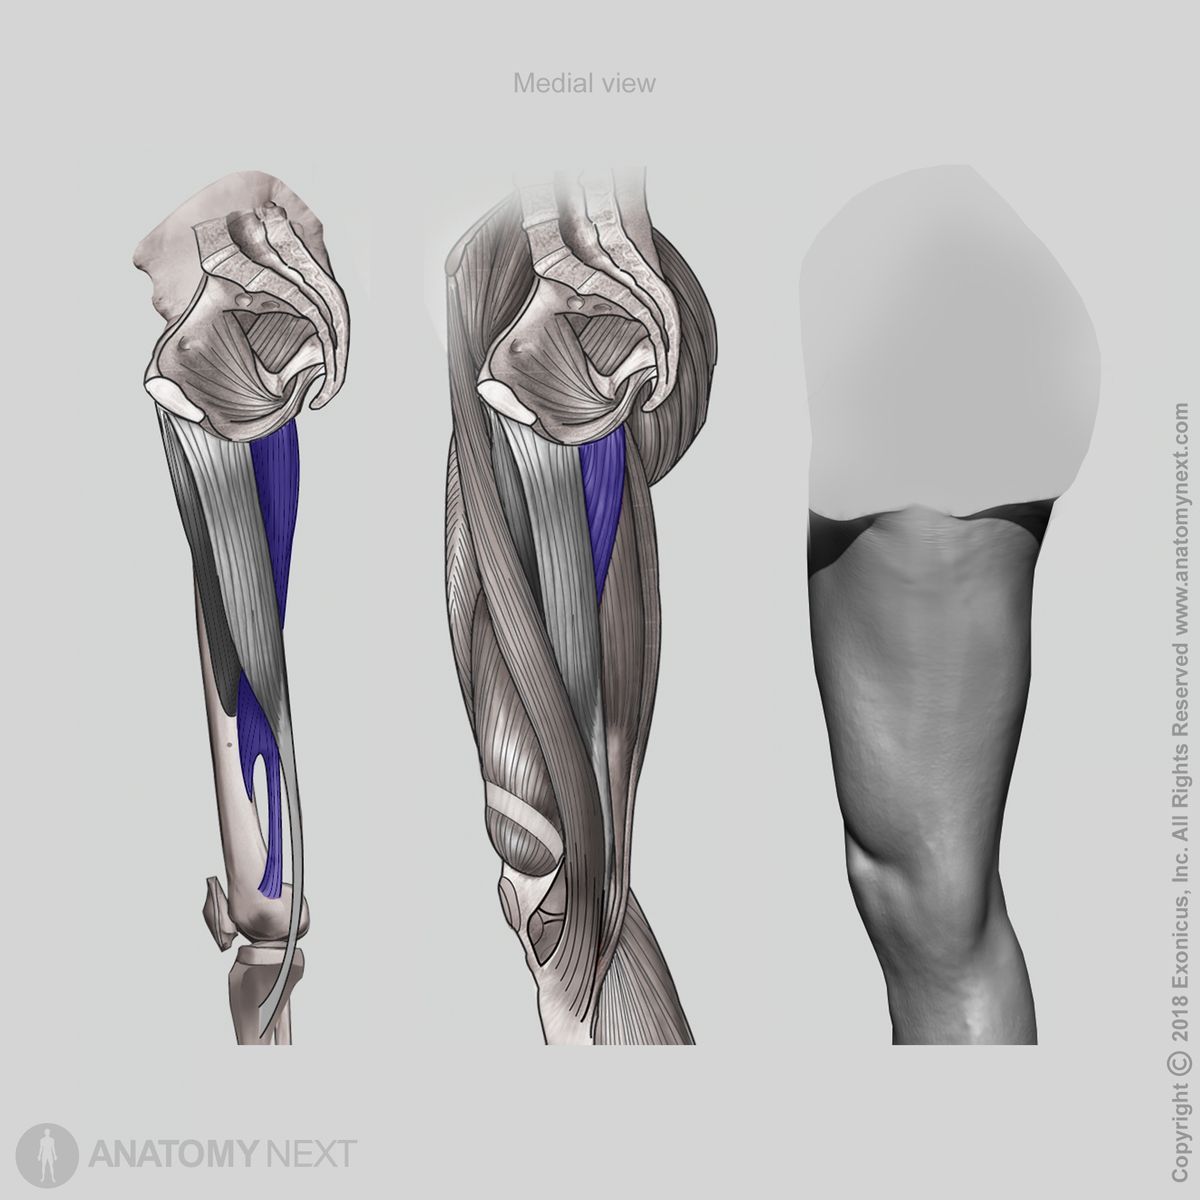 Adductor magnus, Medial view of adductor magnus, Thigh adductors, Thigh muscles, Medial compartment muscles, Medial compartment of thigh, Human muscles